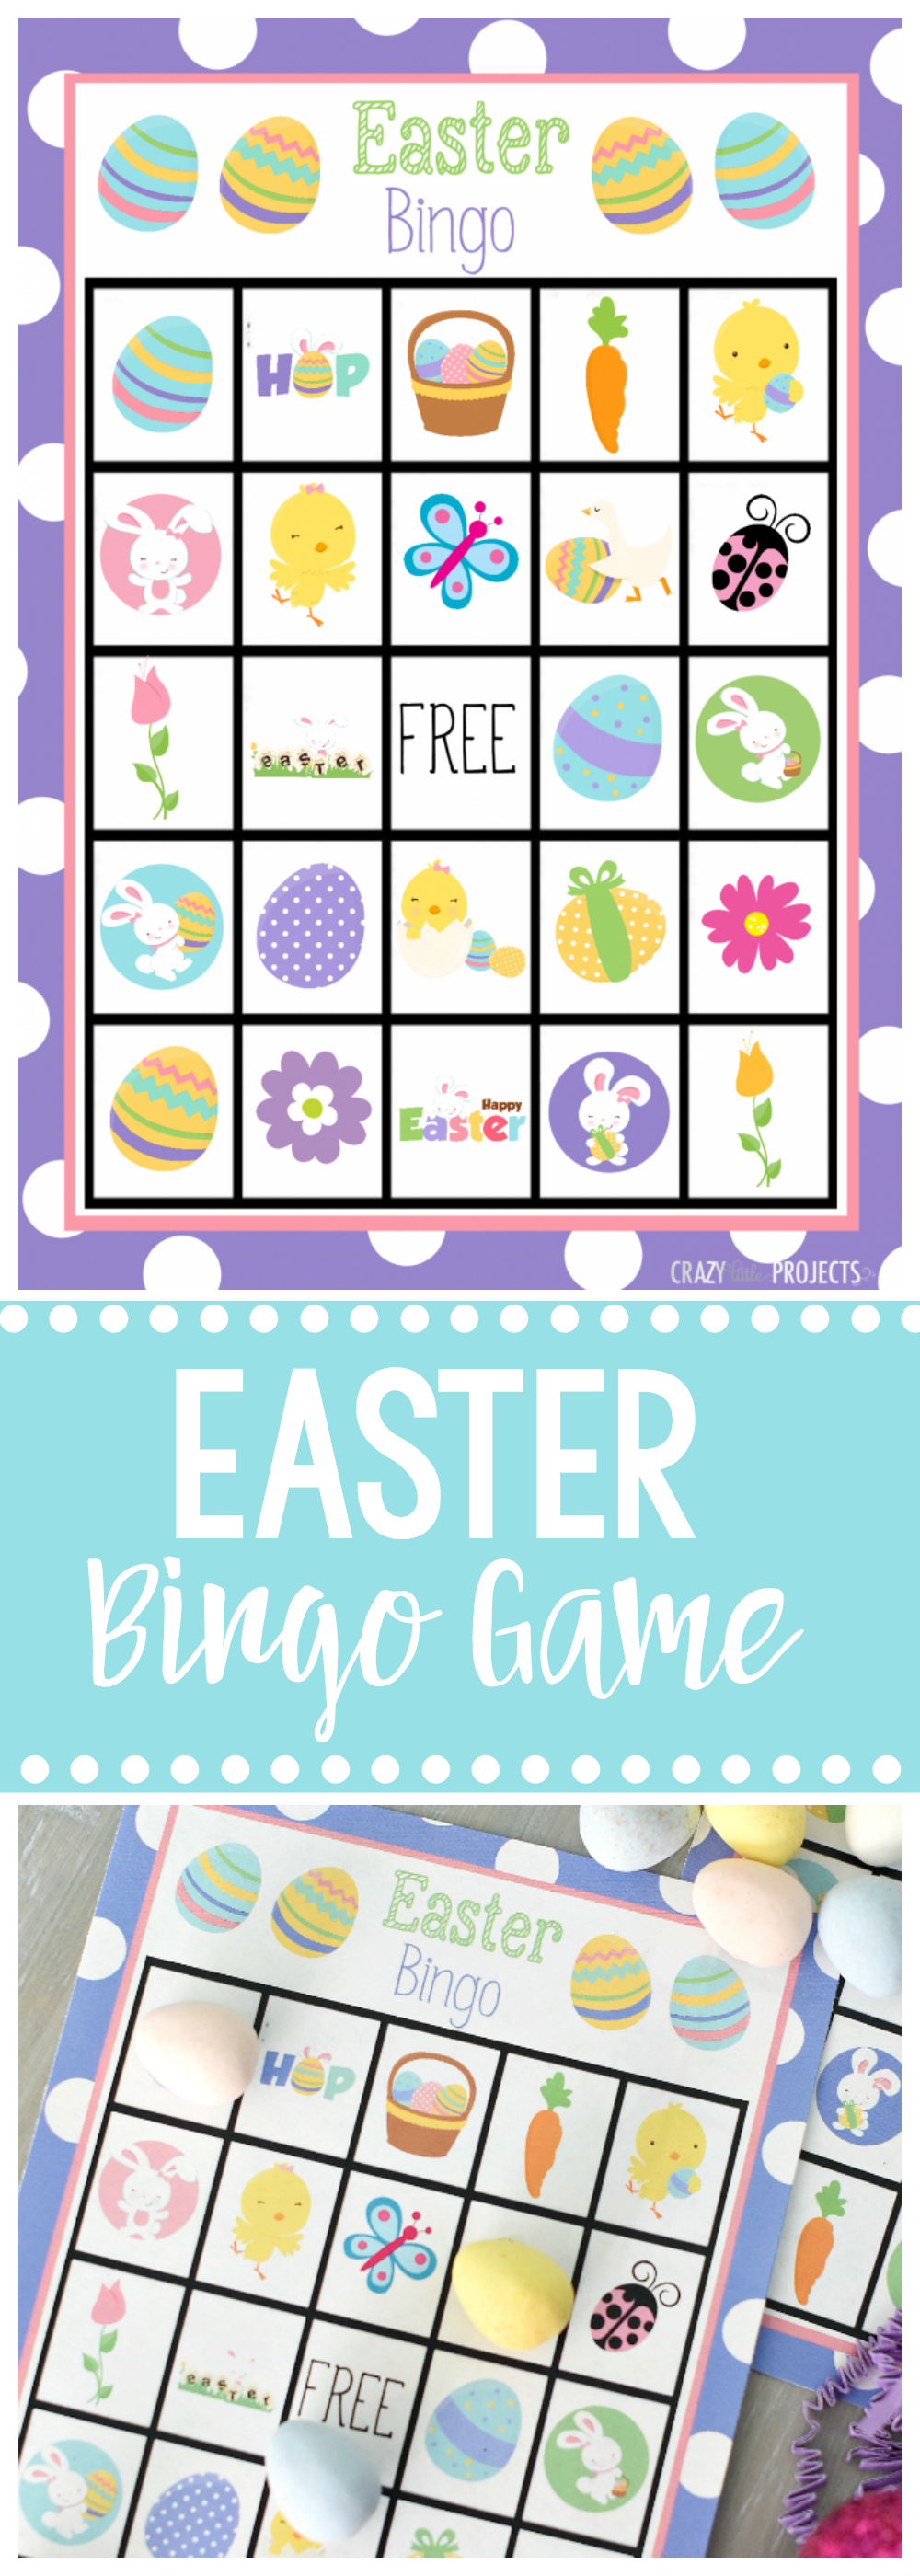 printable-easter-bingo-game-for-kids-crazy-little-projects